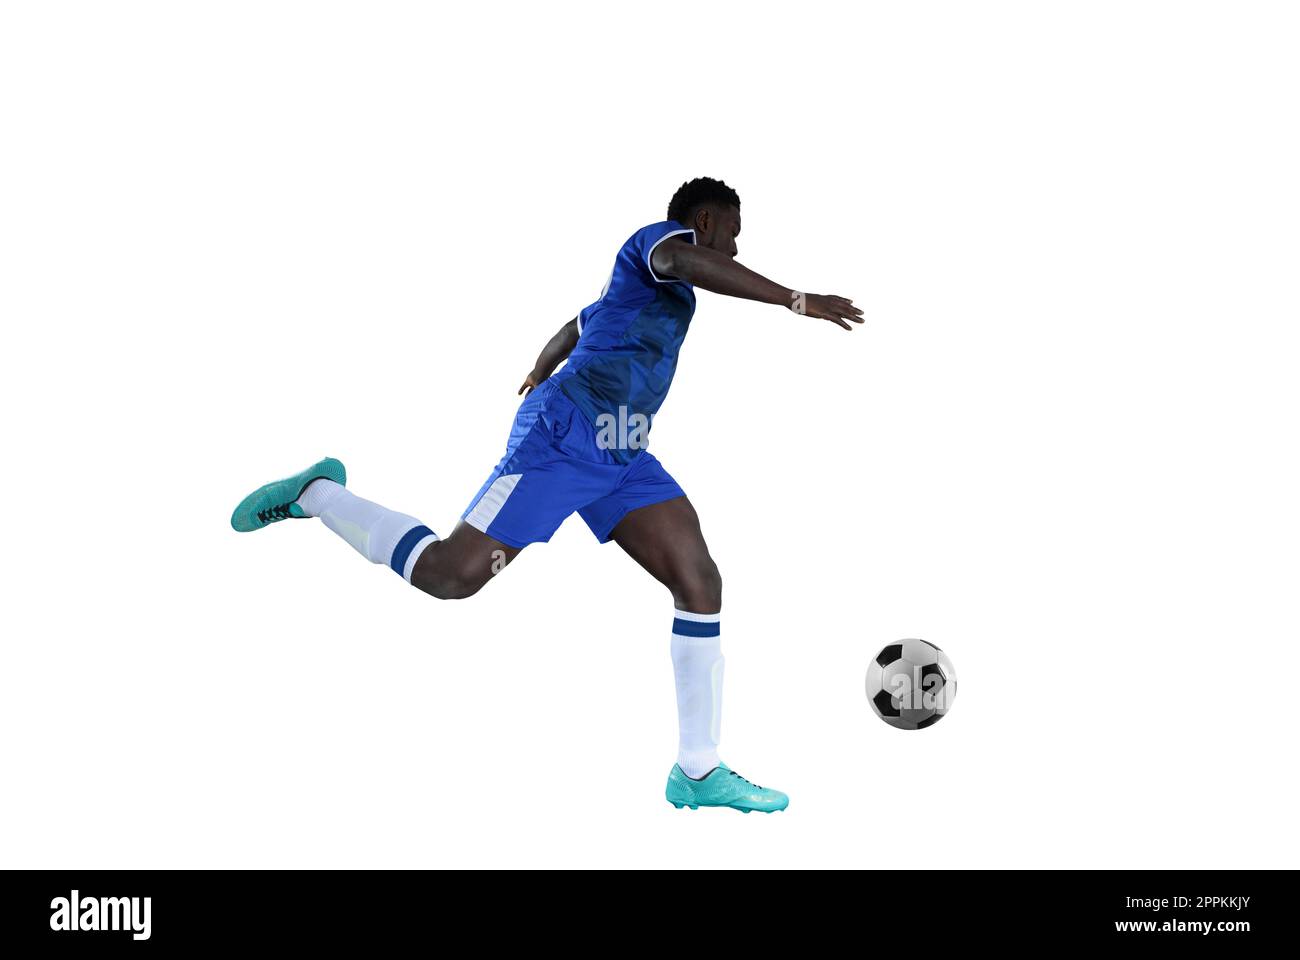 Football striker with blue team suit chases the soccerball Stock Photo